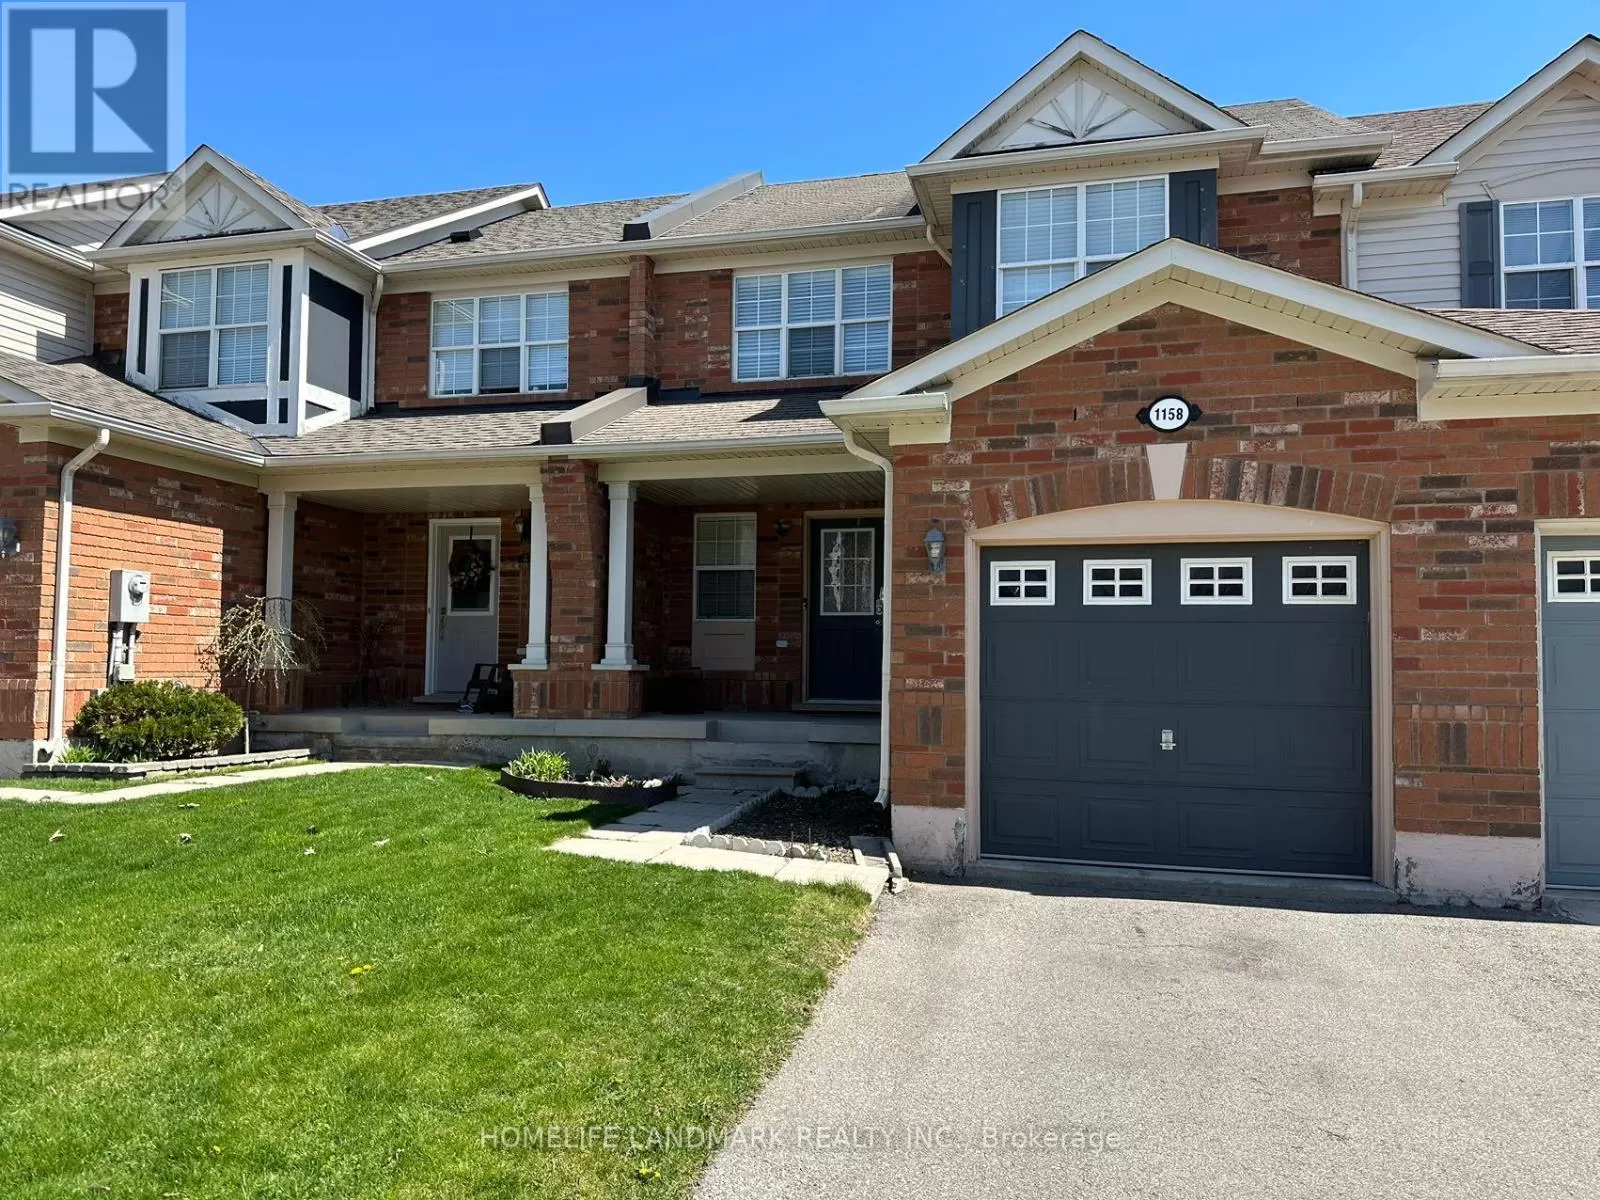 Row / Townhouse for rent: 1158 Mcdowell Cres, Milton, Ontario L9T 6R6